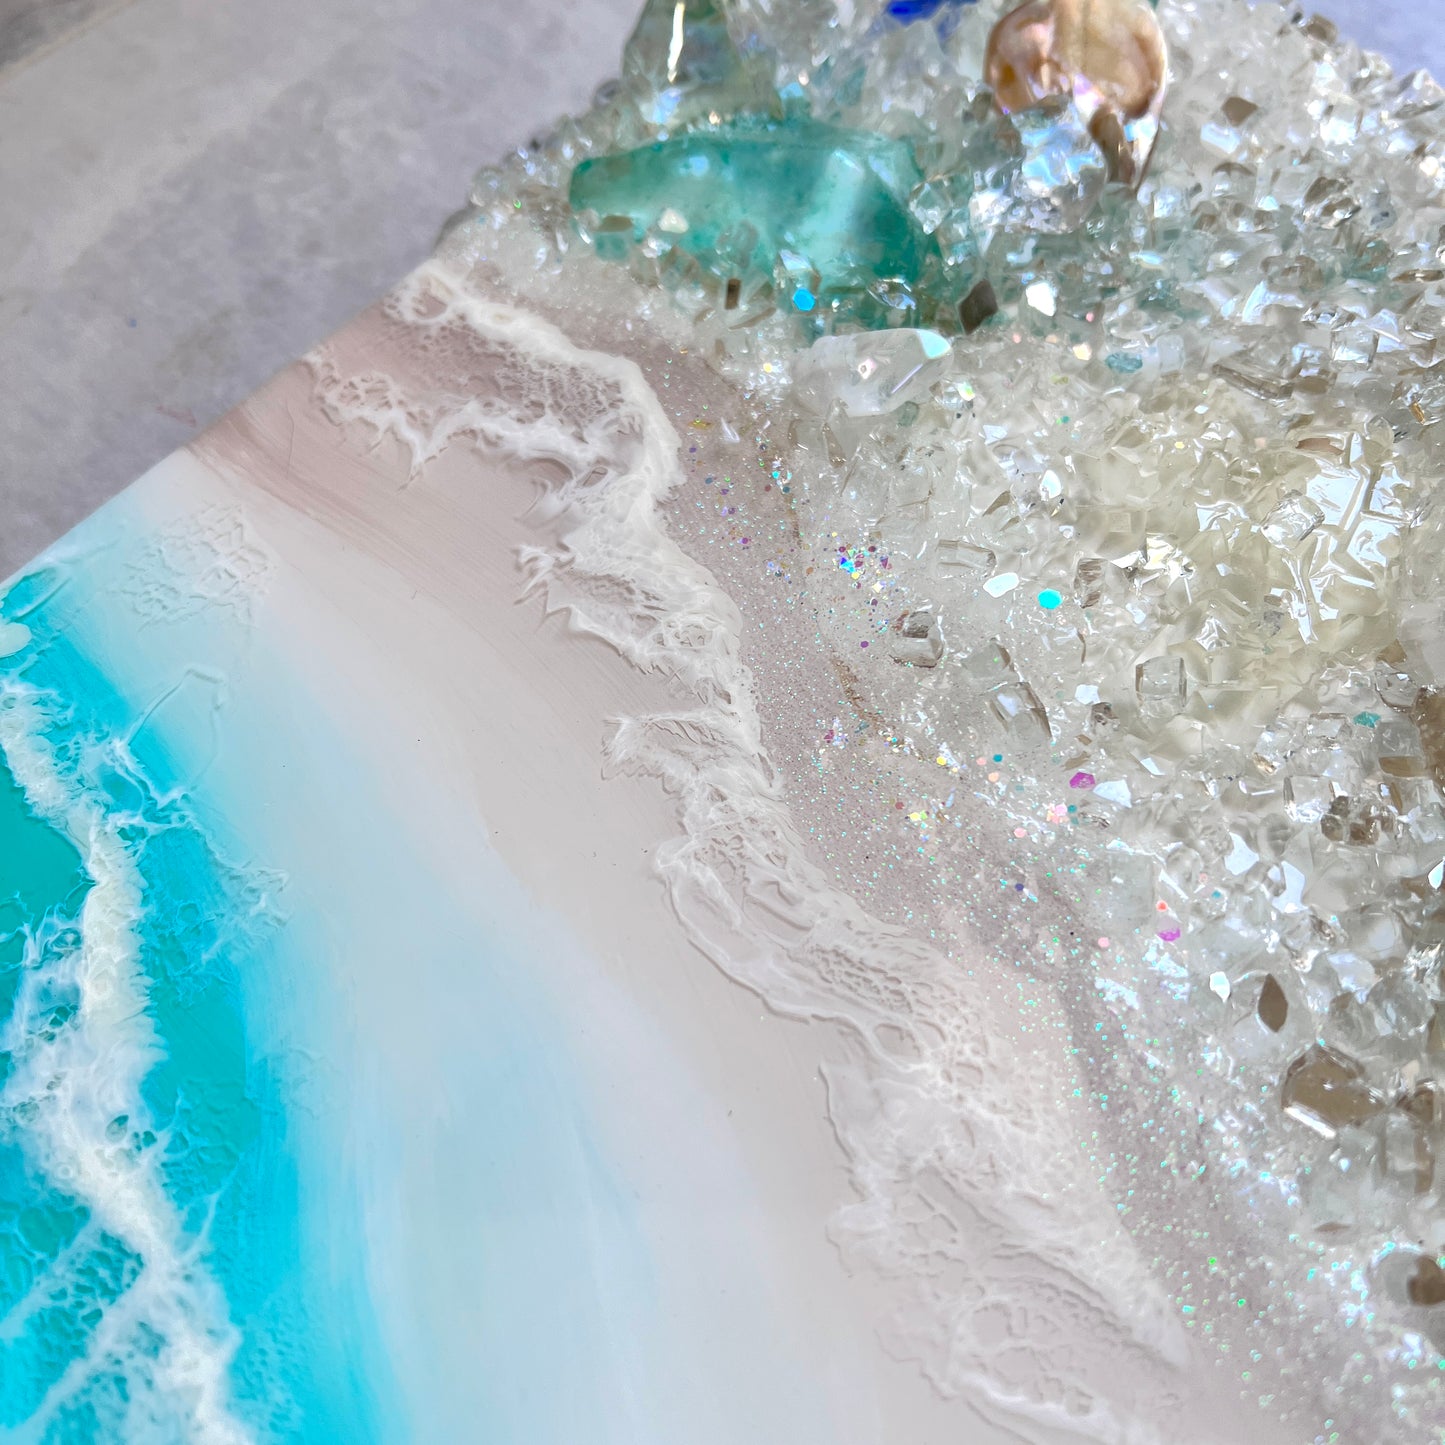 Luxury Beach art with glass and resin crystals